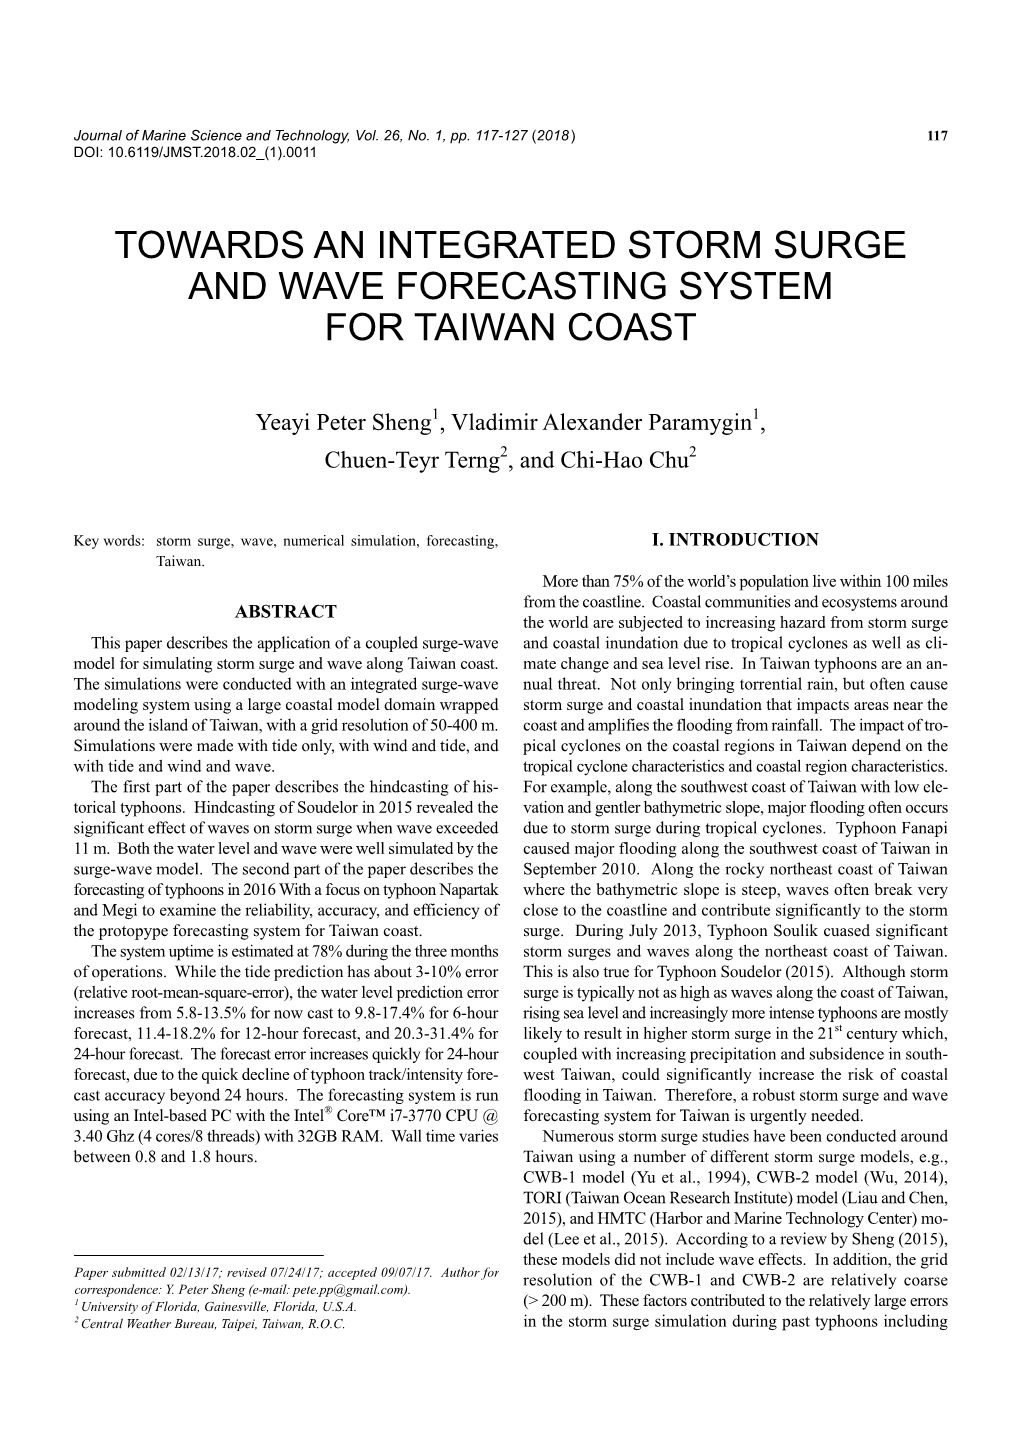 Towards an Integrated Storm Surge and Wave Forecasting System for Taiwan Coast